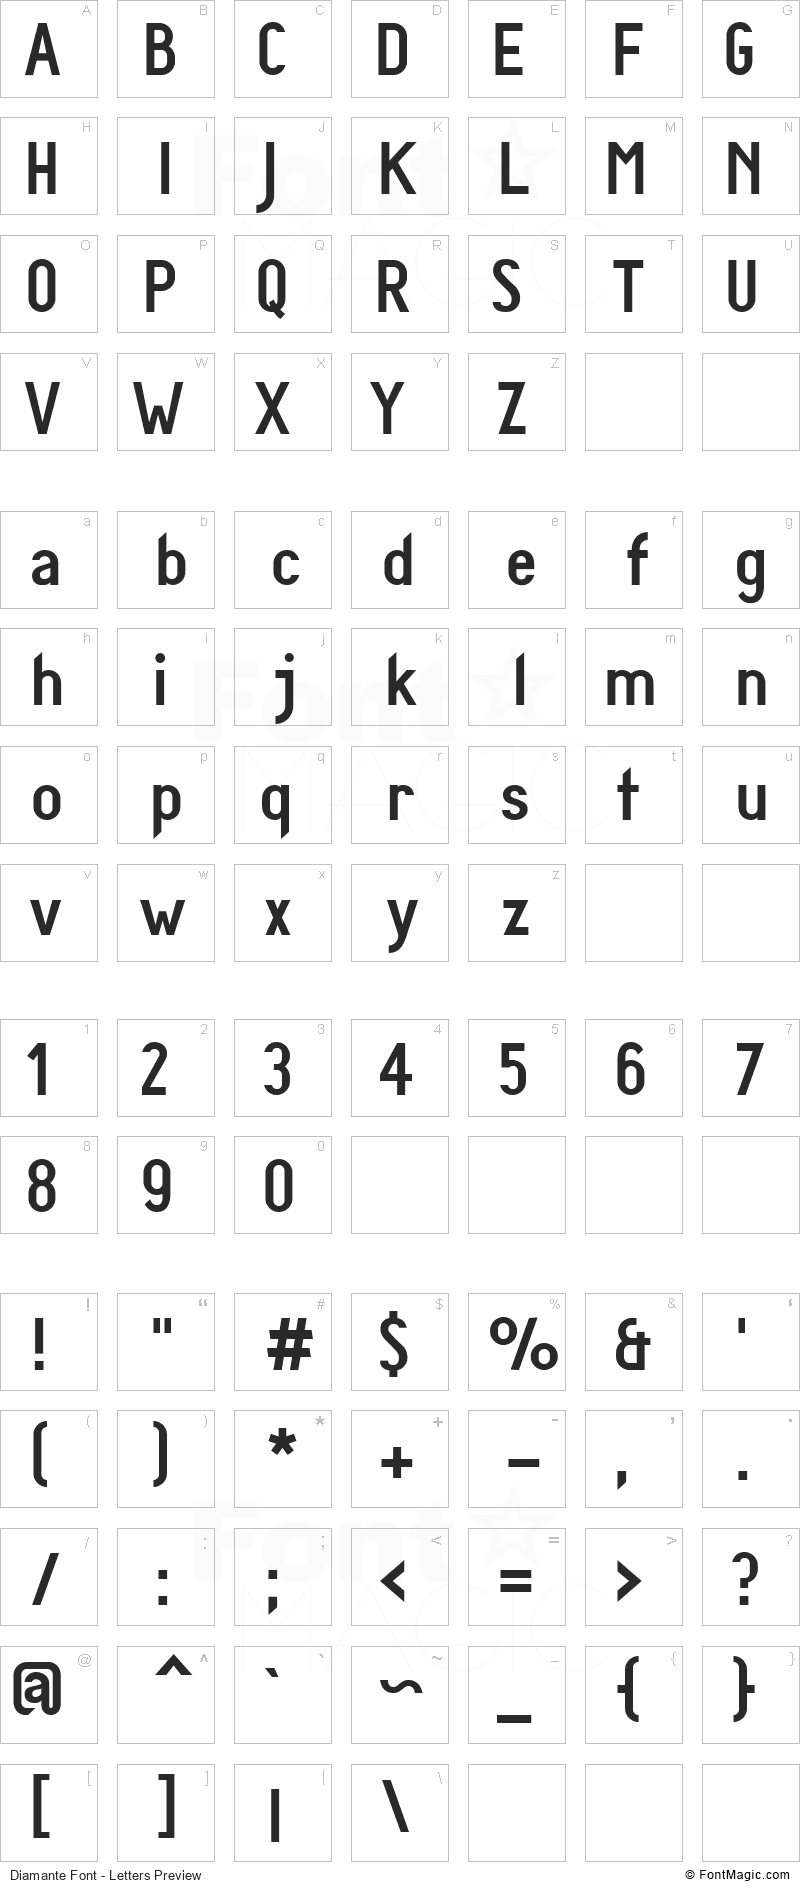 Diamante Font - All Latters Preview Chart